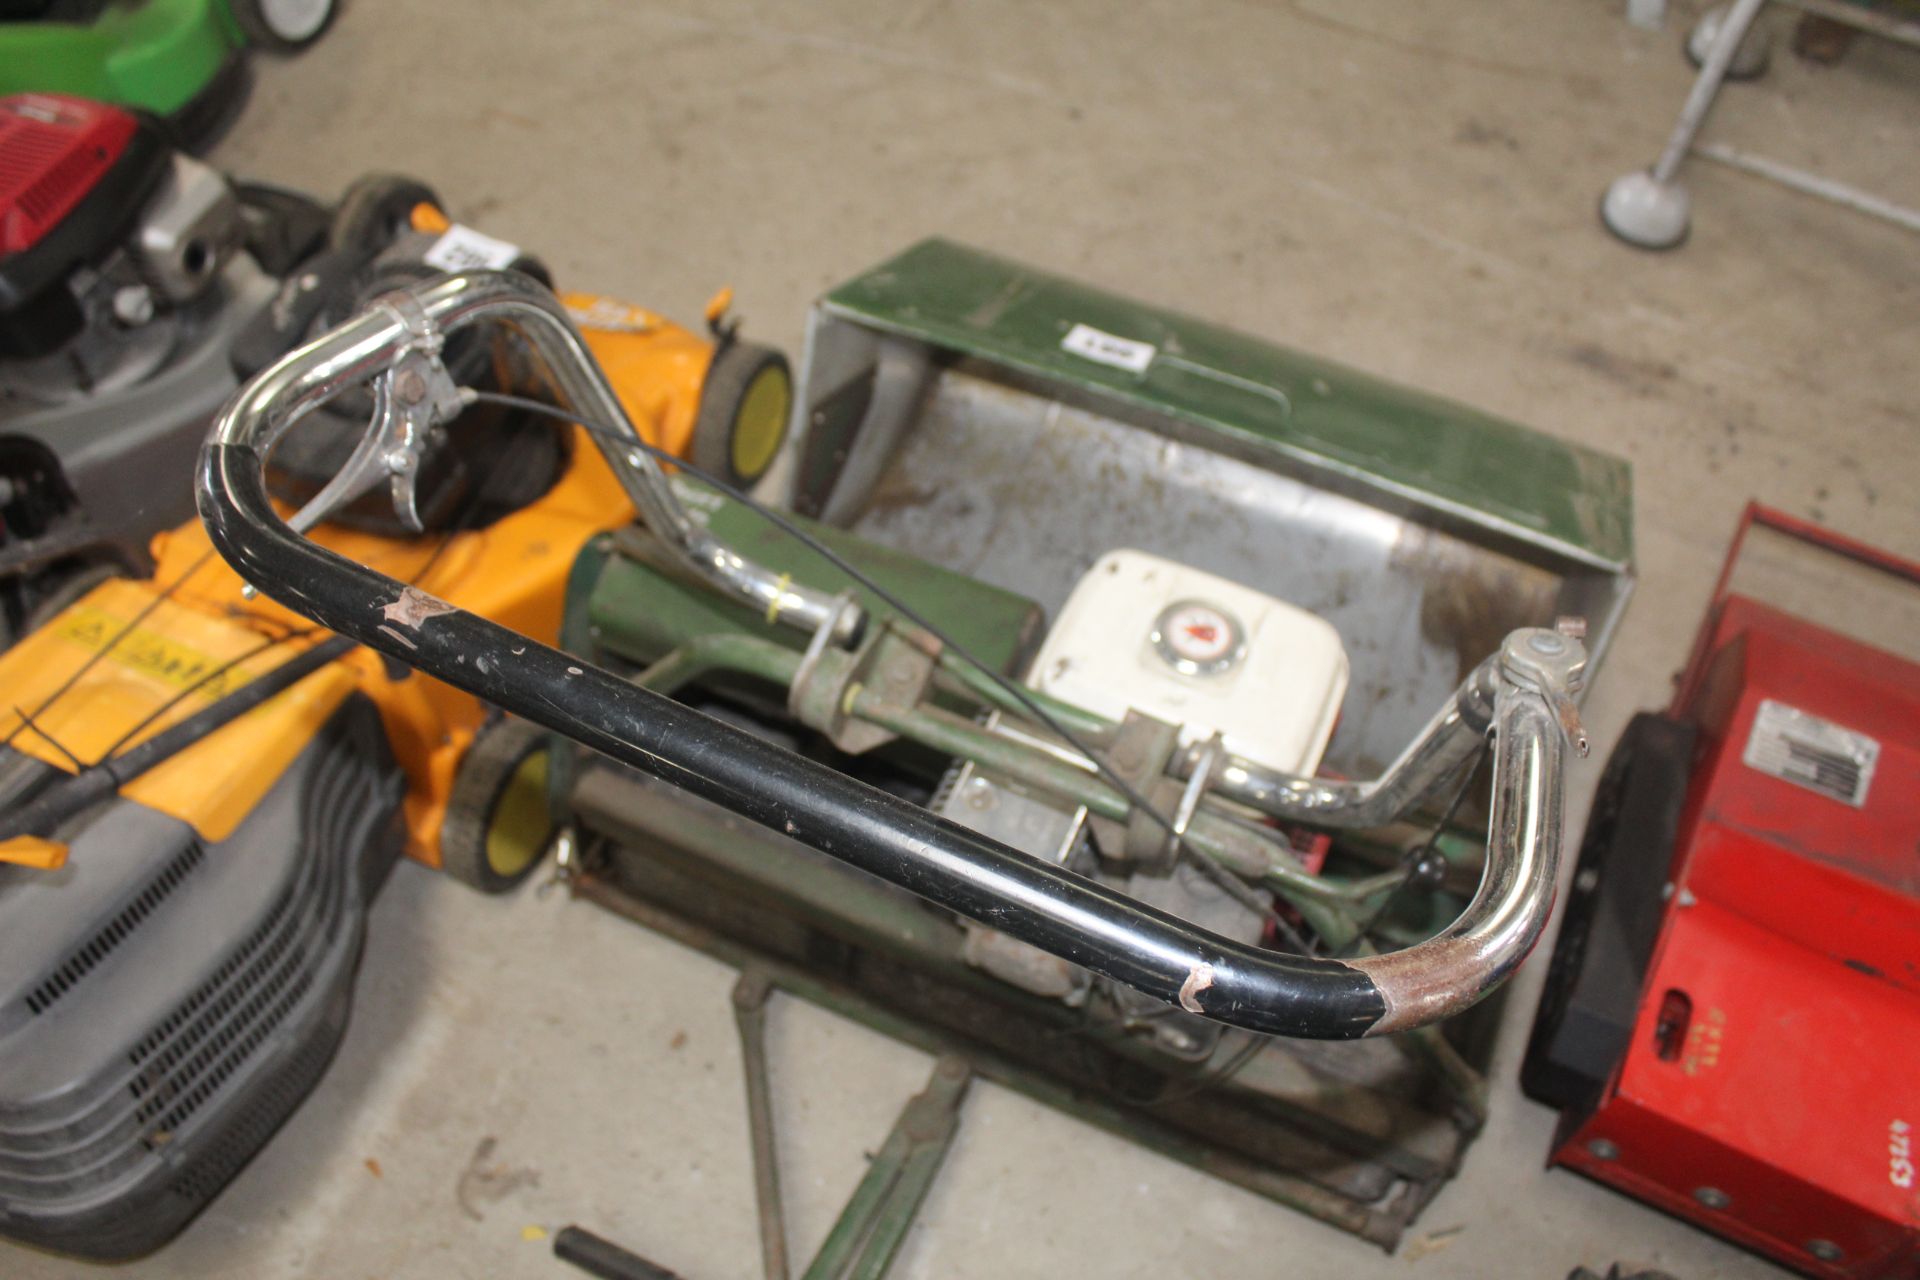 Atco B30 Royal lawn mower. With roller seat and grass box. From local deceased estate. - Image 8 of 11